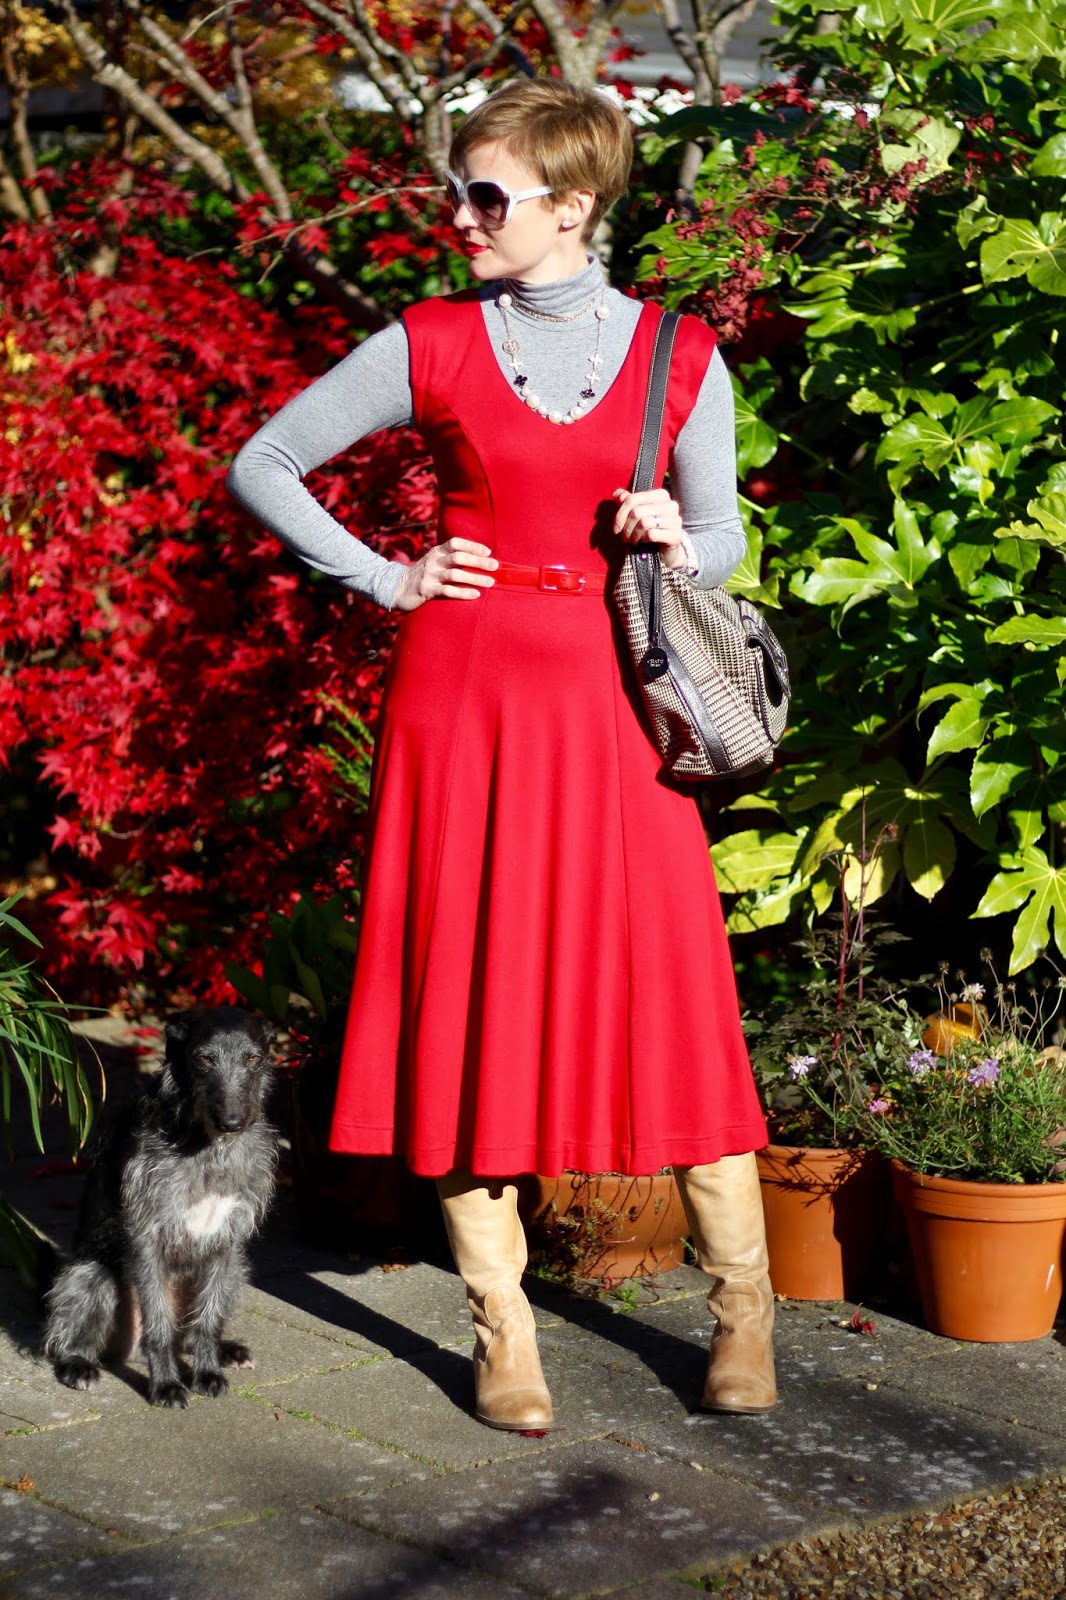 How to wear a red dress | Smart-casual 70's style | Fake Fabulous